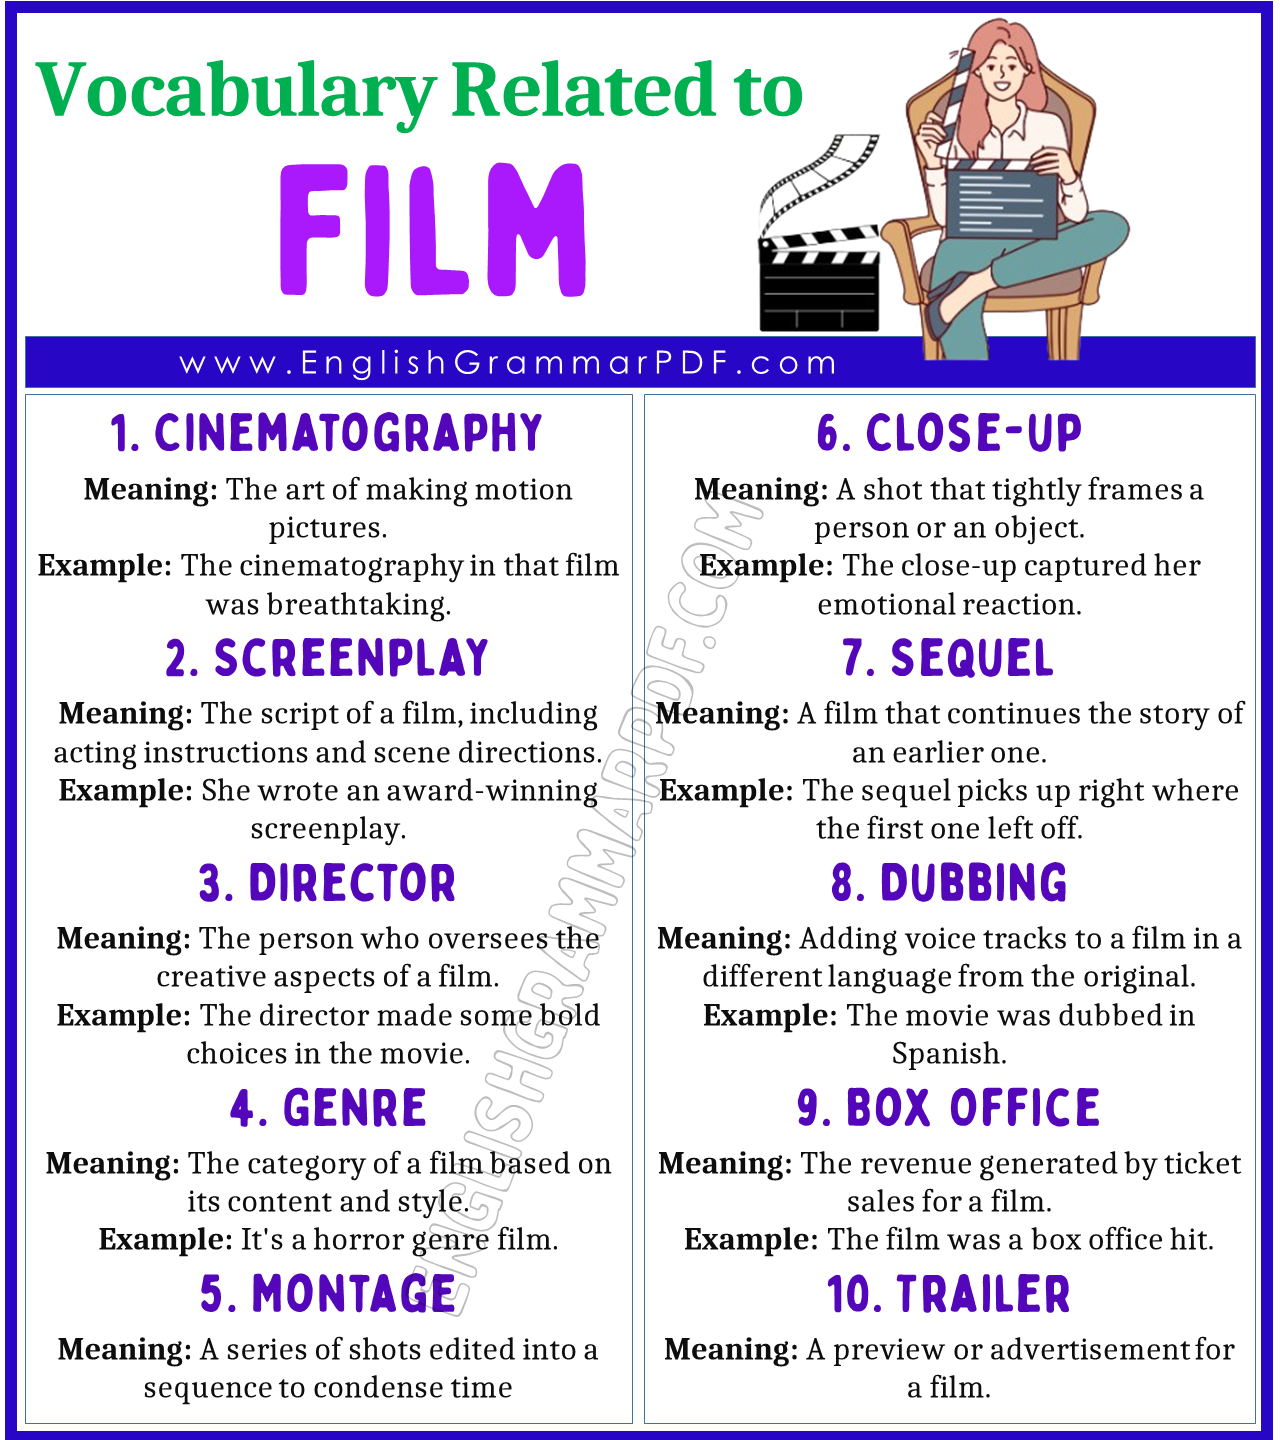 Film Related Vocabulary Terms